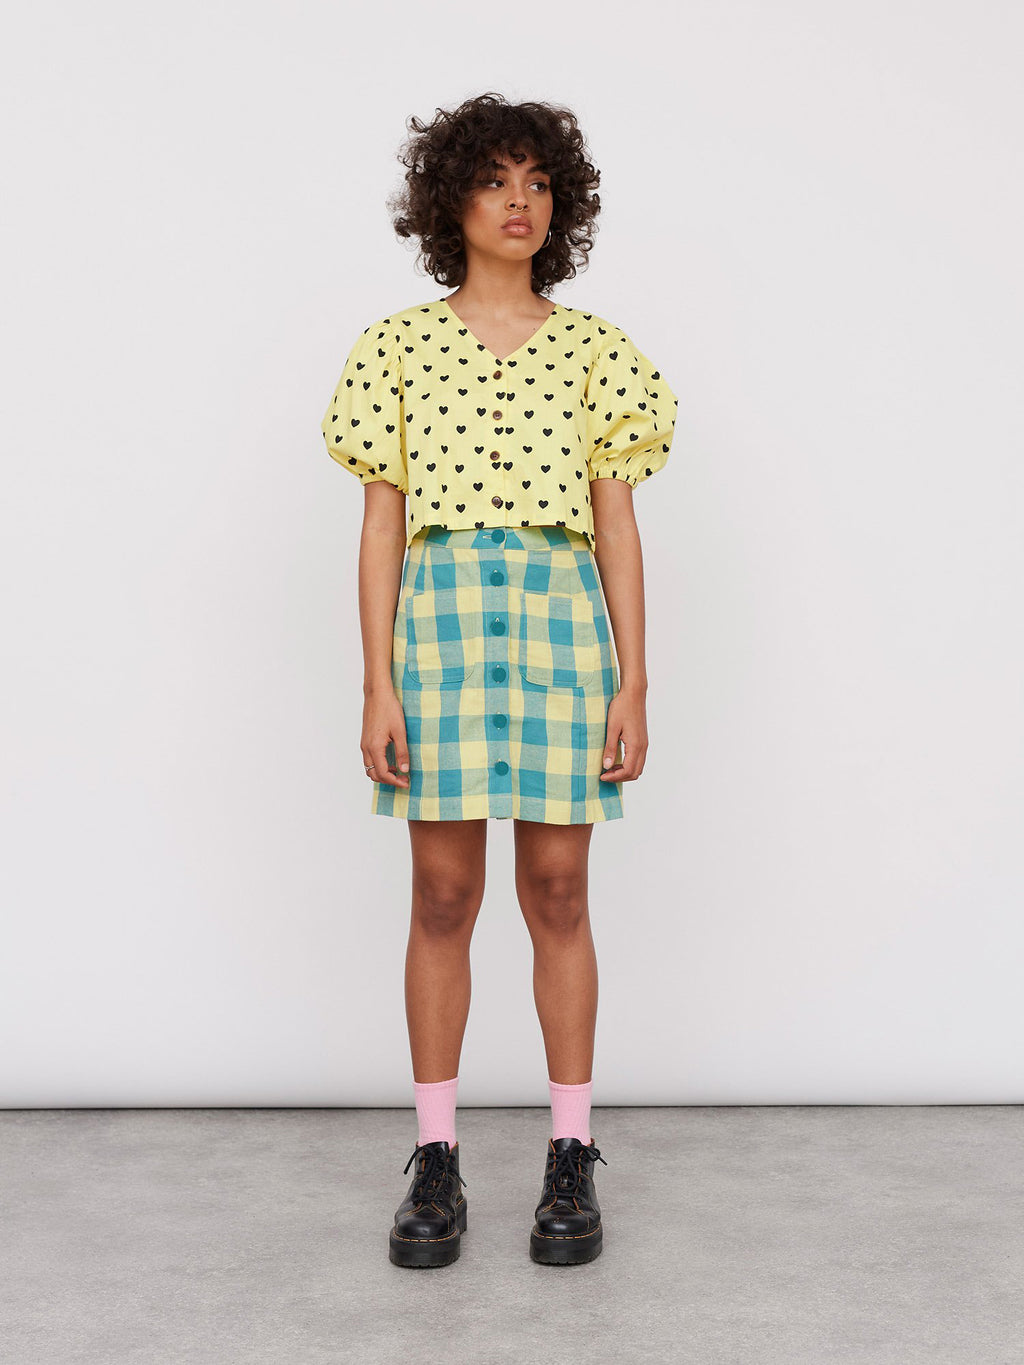 Lazy Oaf Blue and Yellow Gingham Skirt